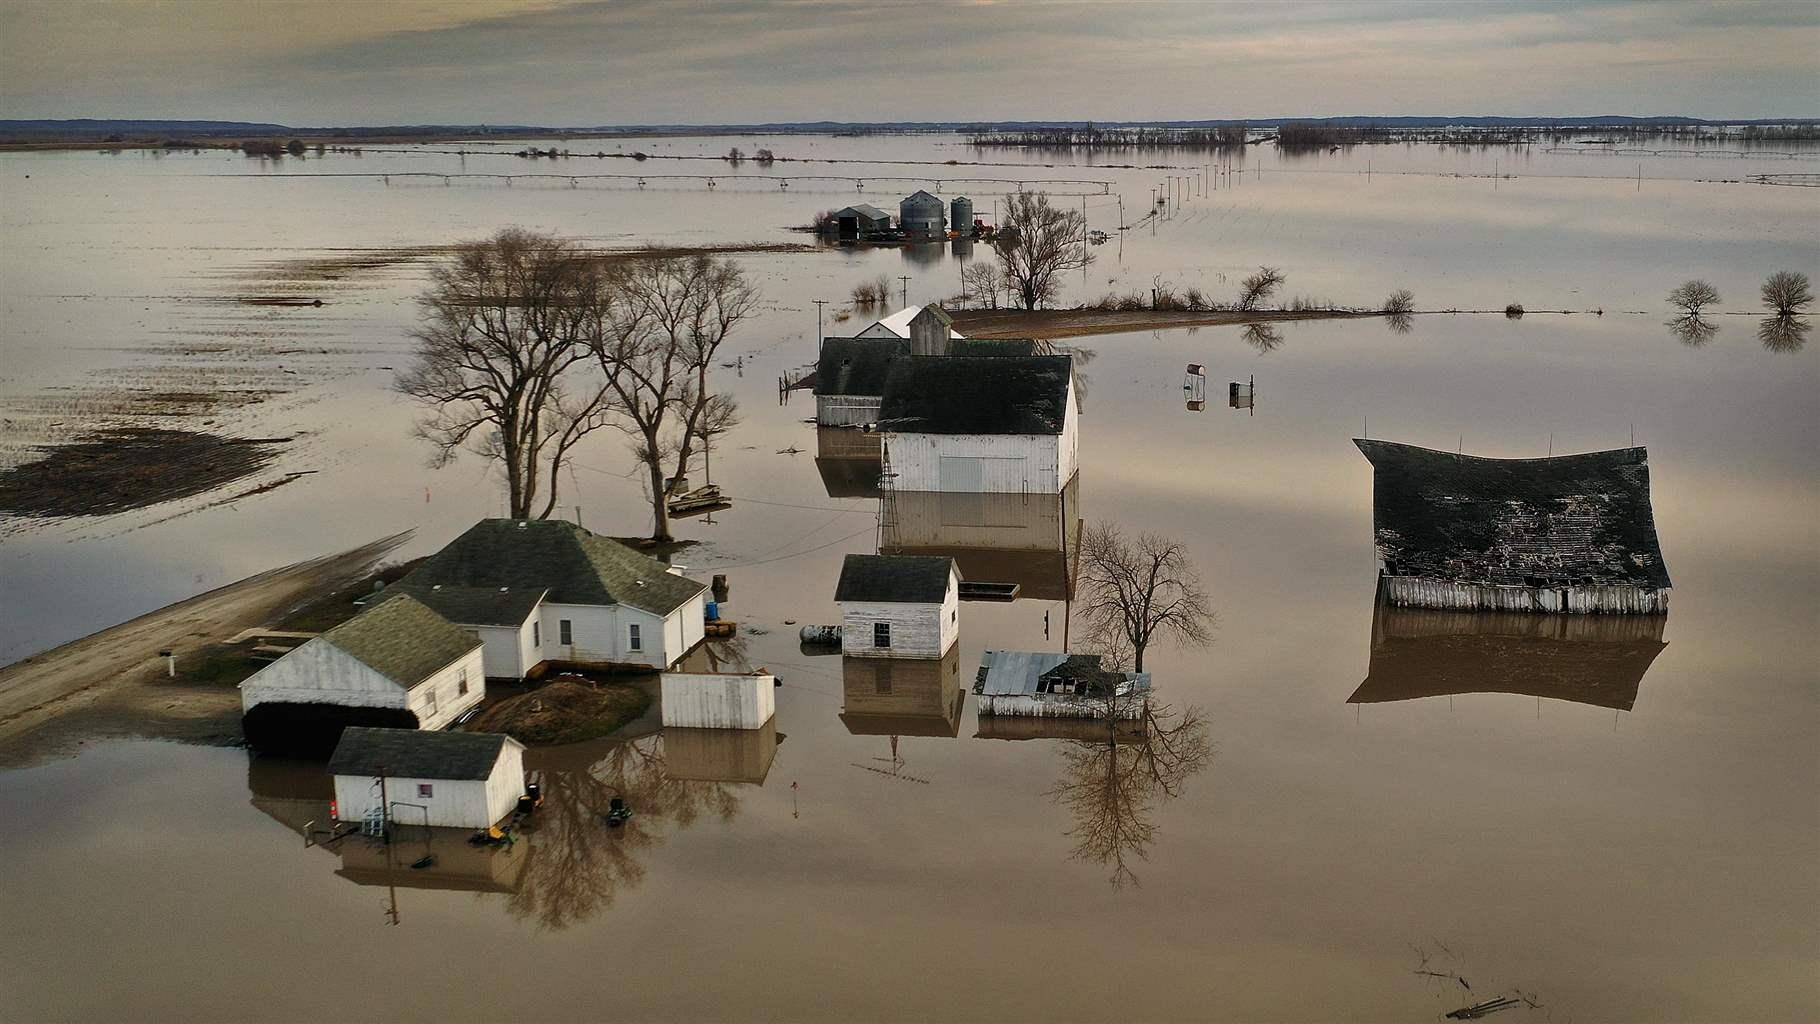 Floodwater surrounds a farm on March 22, 2019 near Craig, Missouri. Midwest states are battling some of the worst floodings they have experienced in decades as rain and snowmelt from the recent "bomb cyclone" has inundated rivers and streams.